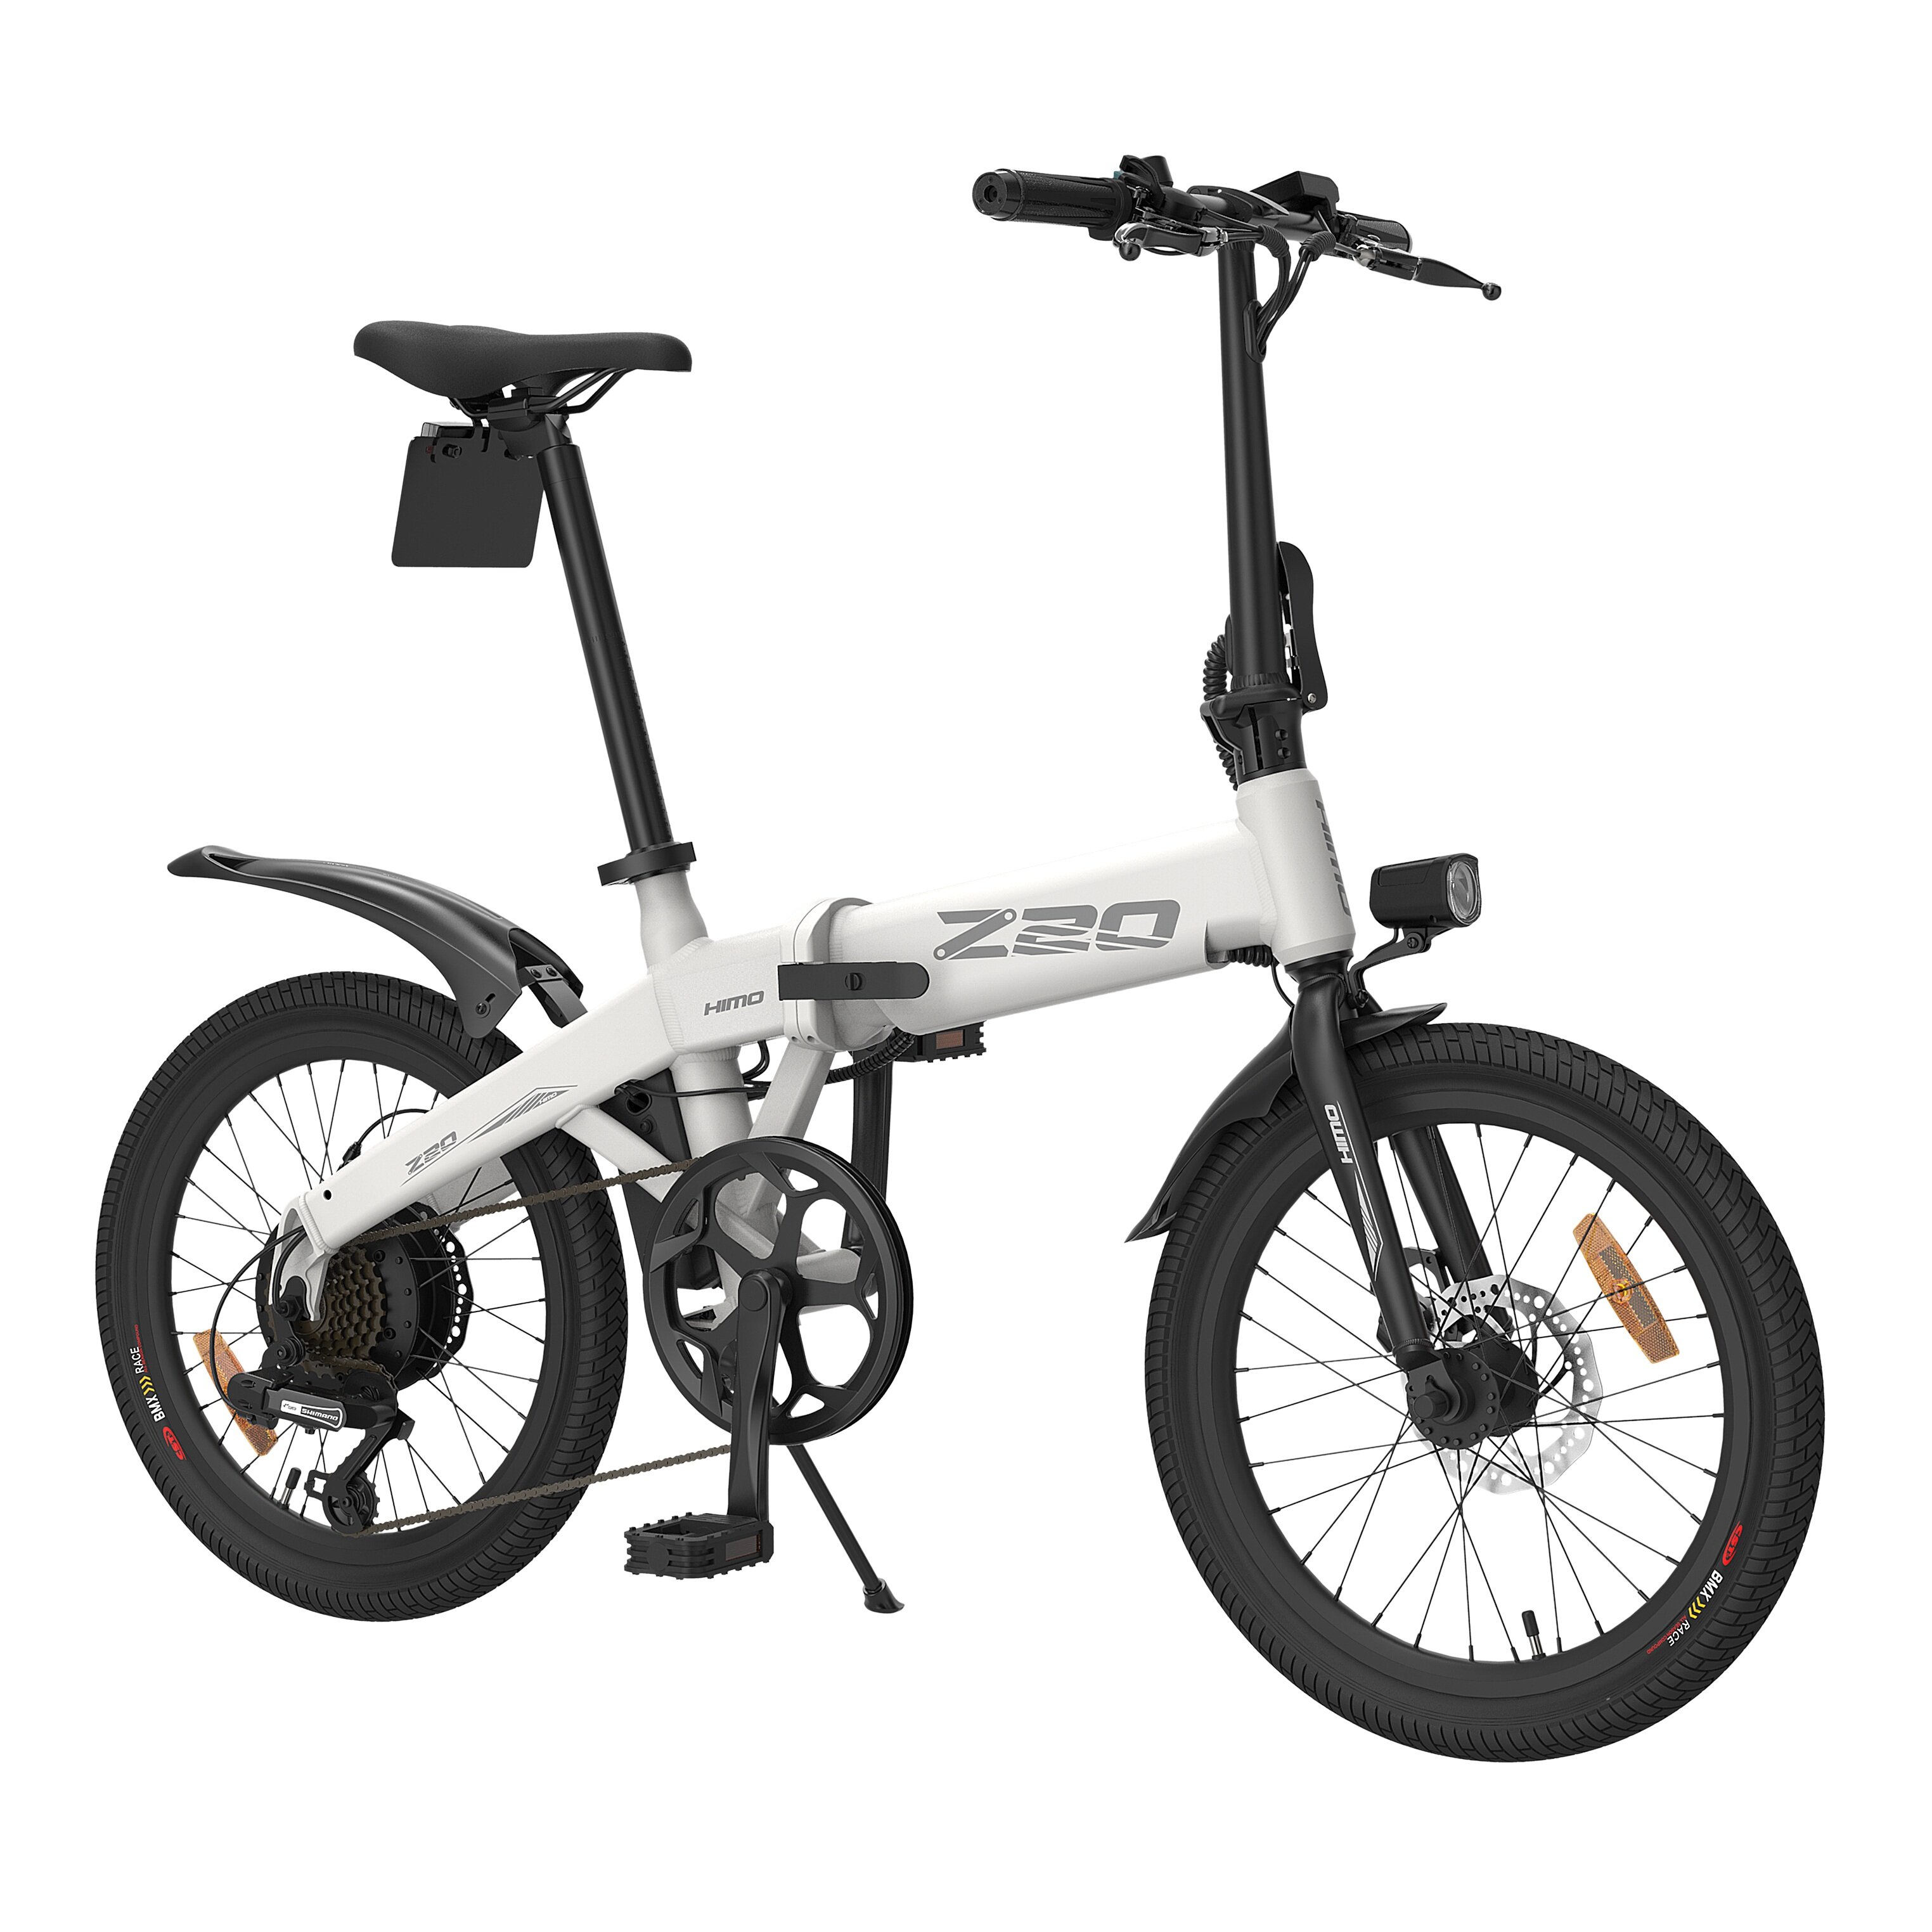 Image of [Shipped To UK] HIMO Z20 10AH 36V 250W Folding Electric Bike 20inch Tire 25km/h Top Speed 80km Mileage Range 6-speed Tra